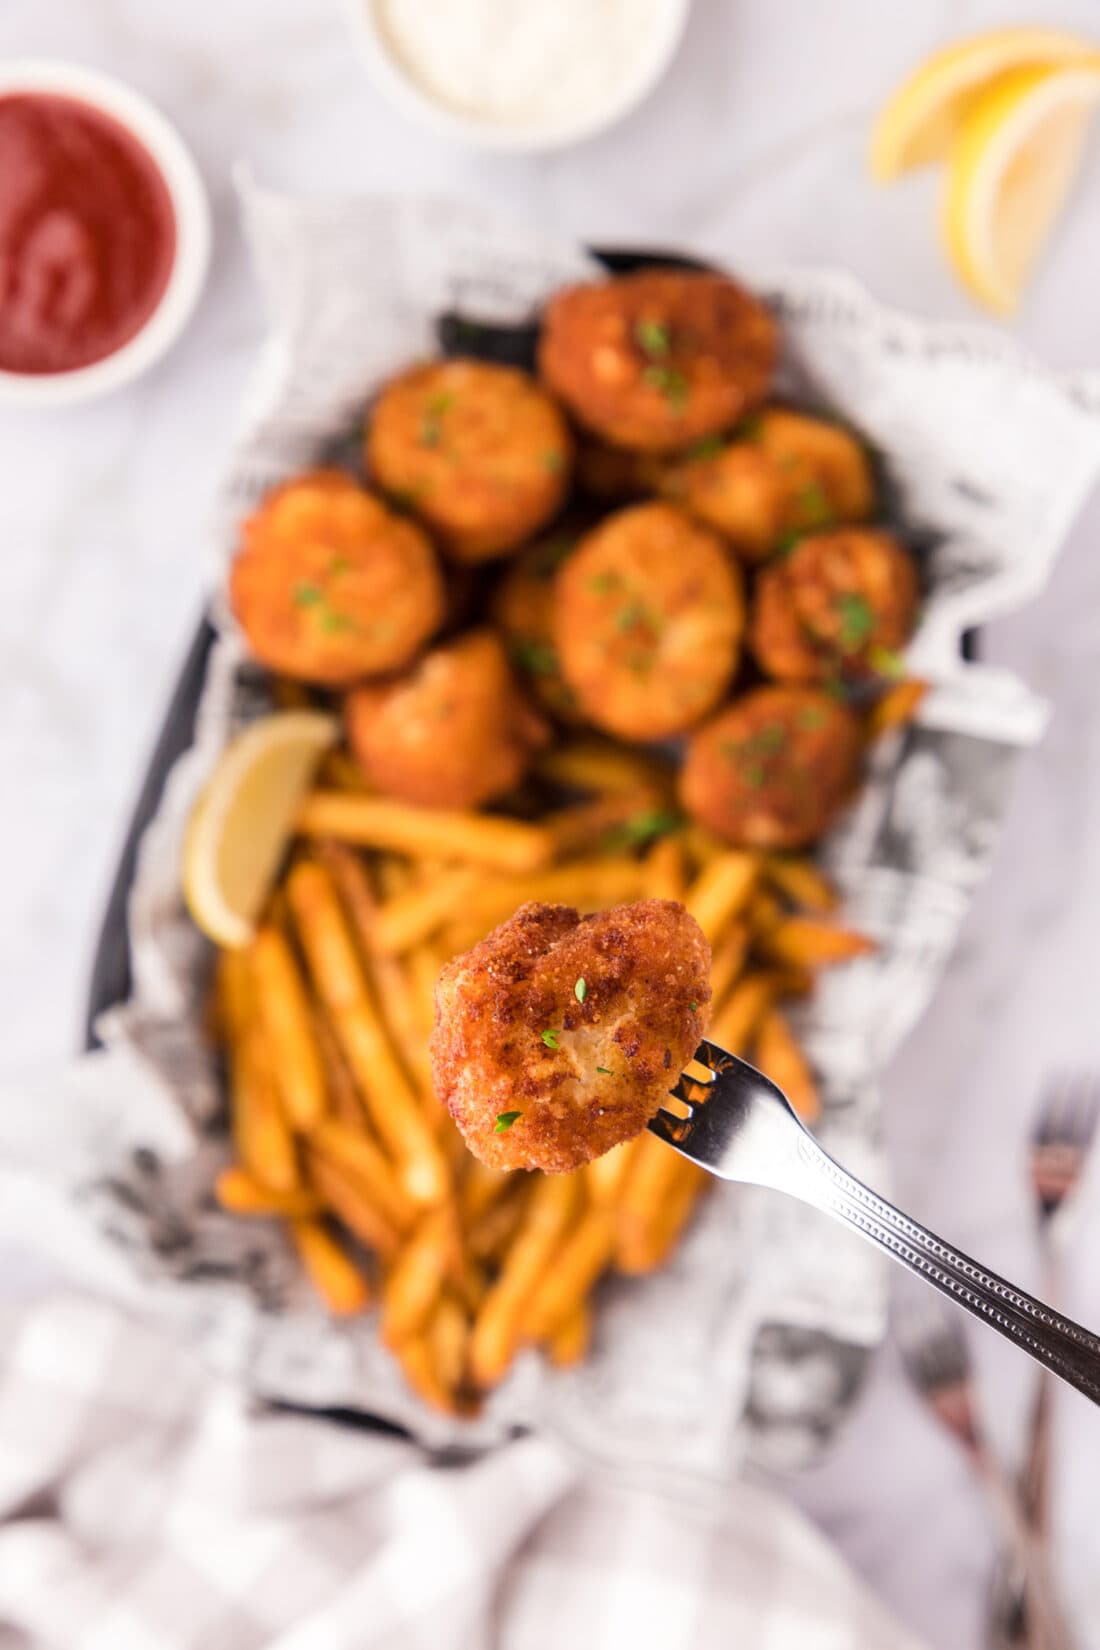 A Fried Scallop on a seafood fork held above a basket of Fried Scallops and fries